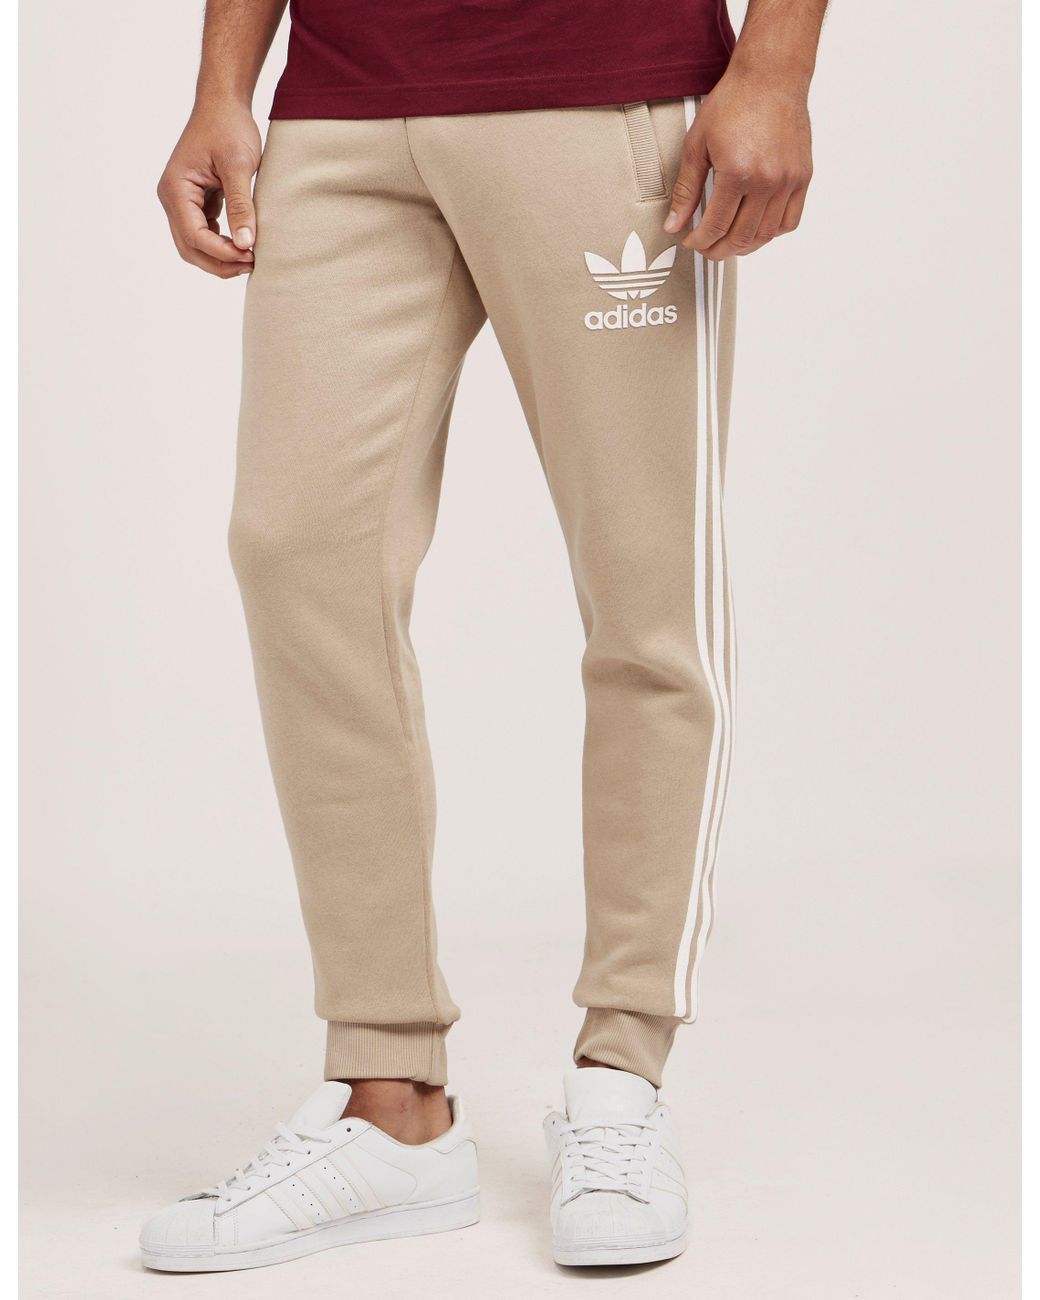 adidas Originals Cuffed Track Pants Stone/white for | Lyst Canada